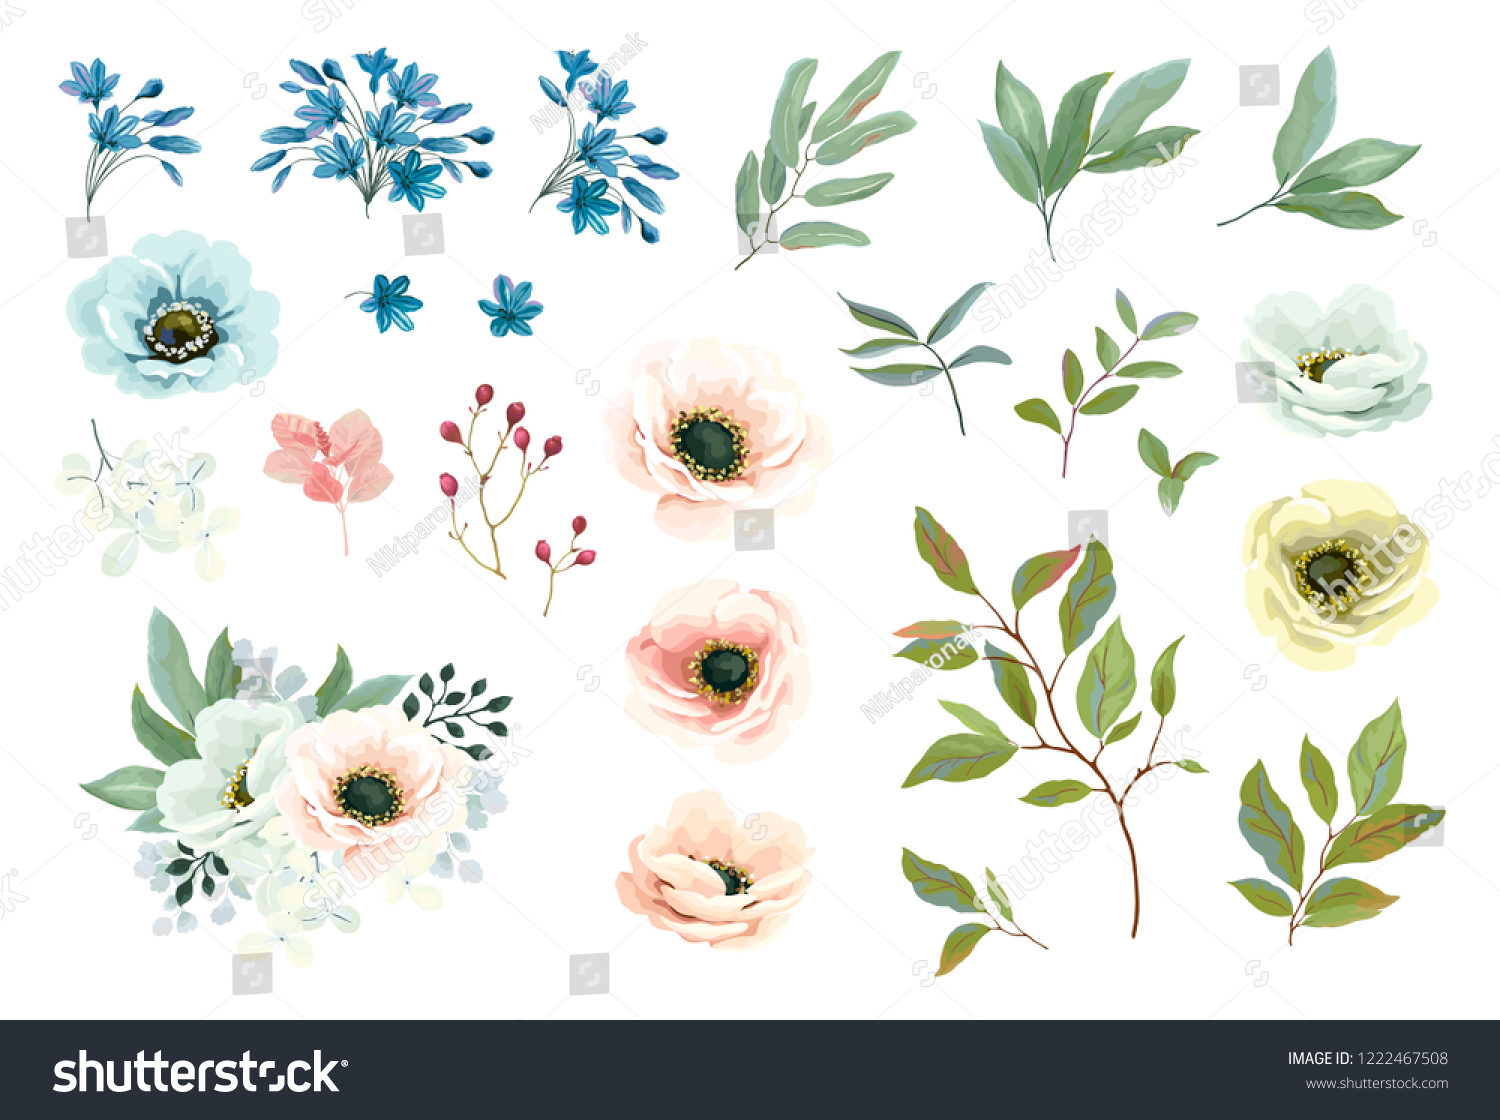 SVG of Collection of floral elements, flowers Anemones, blue Agapanthus, green leaves and branches. Floral template for your wedding, greeting or invitation design. Vector illustration in vintage style. svg